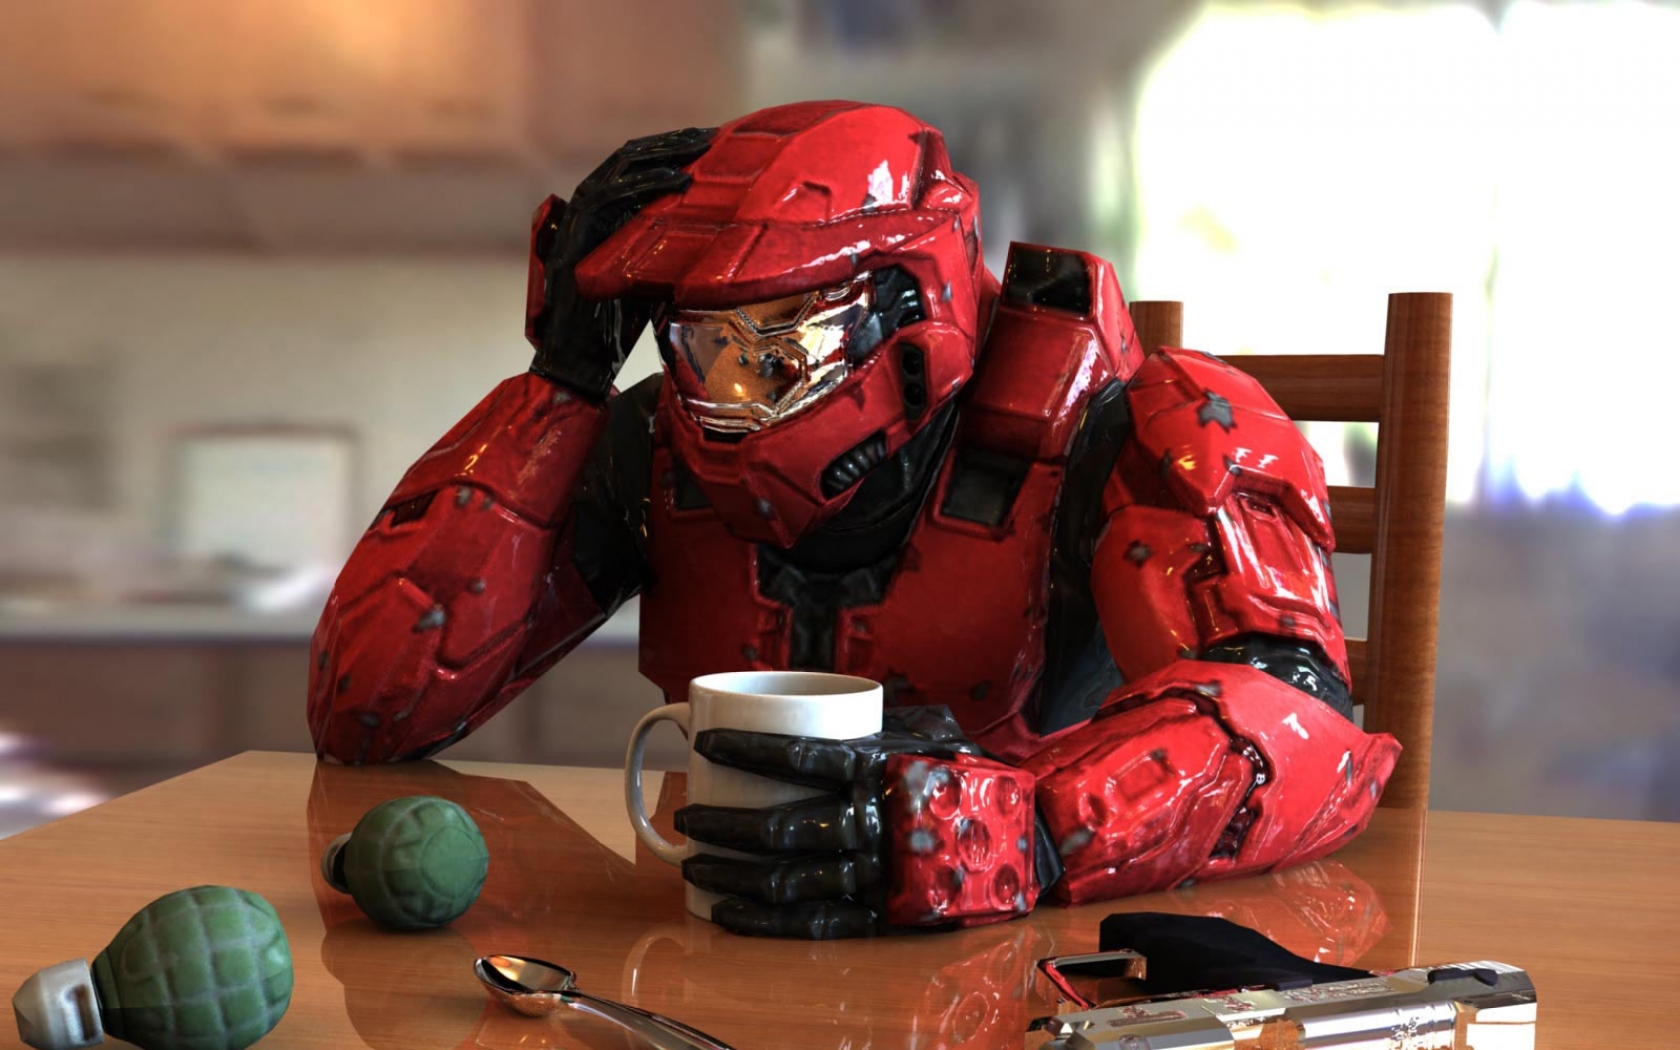 Master chief sitting at a table.